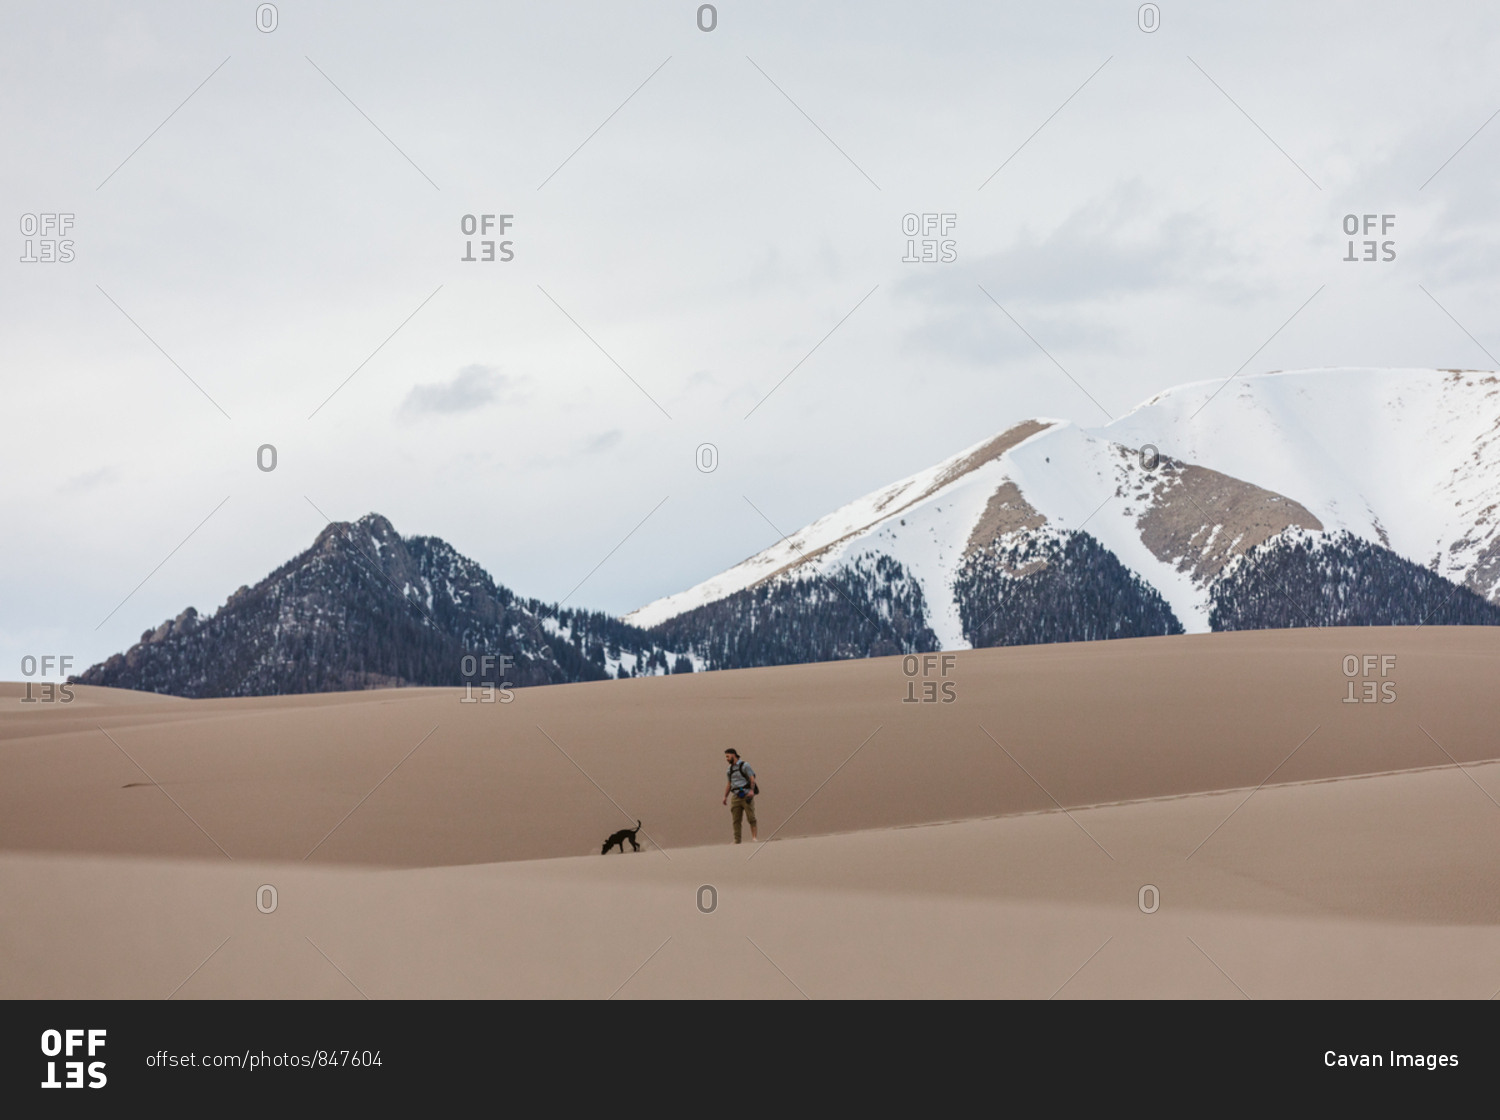 Hiker and small dog walk in the great sand dunes under snowy mountains